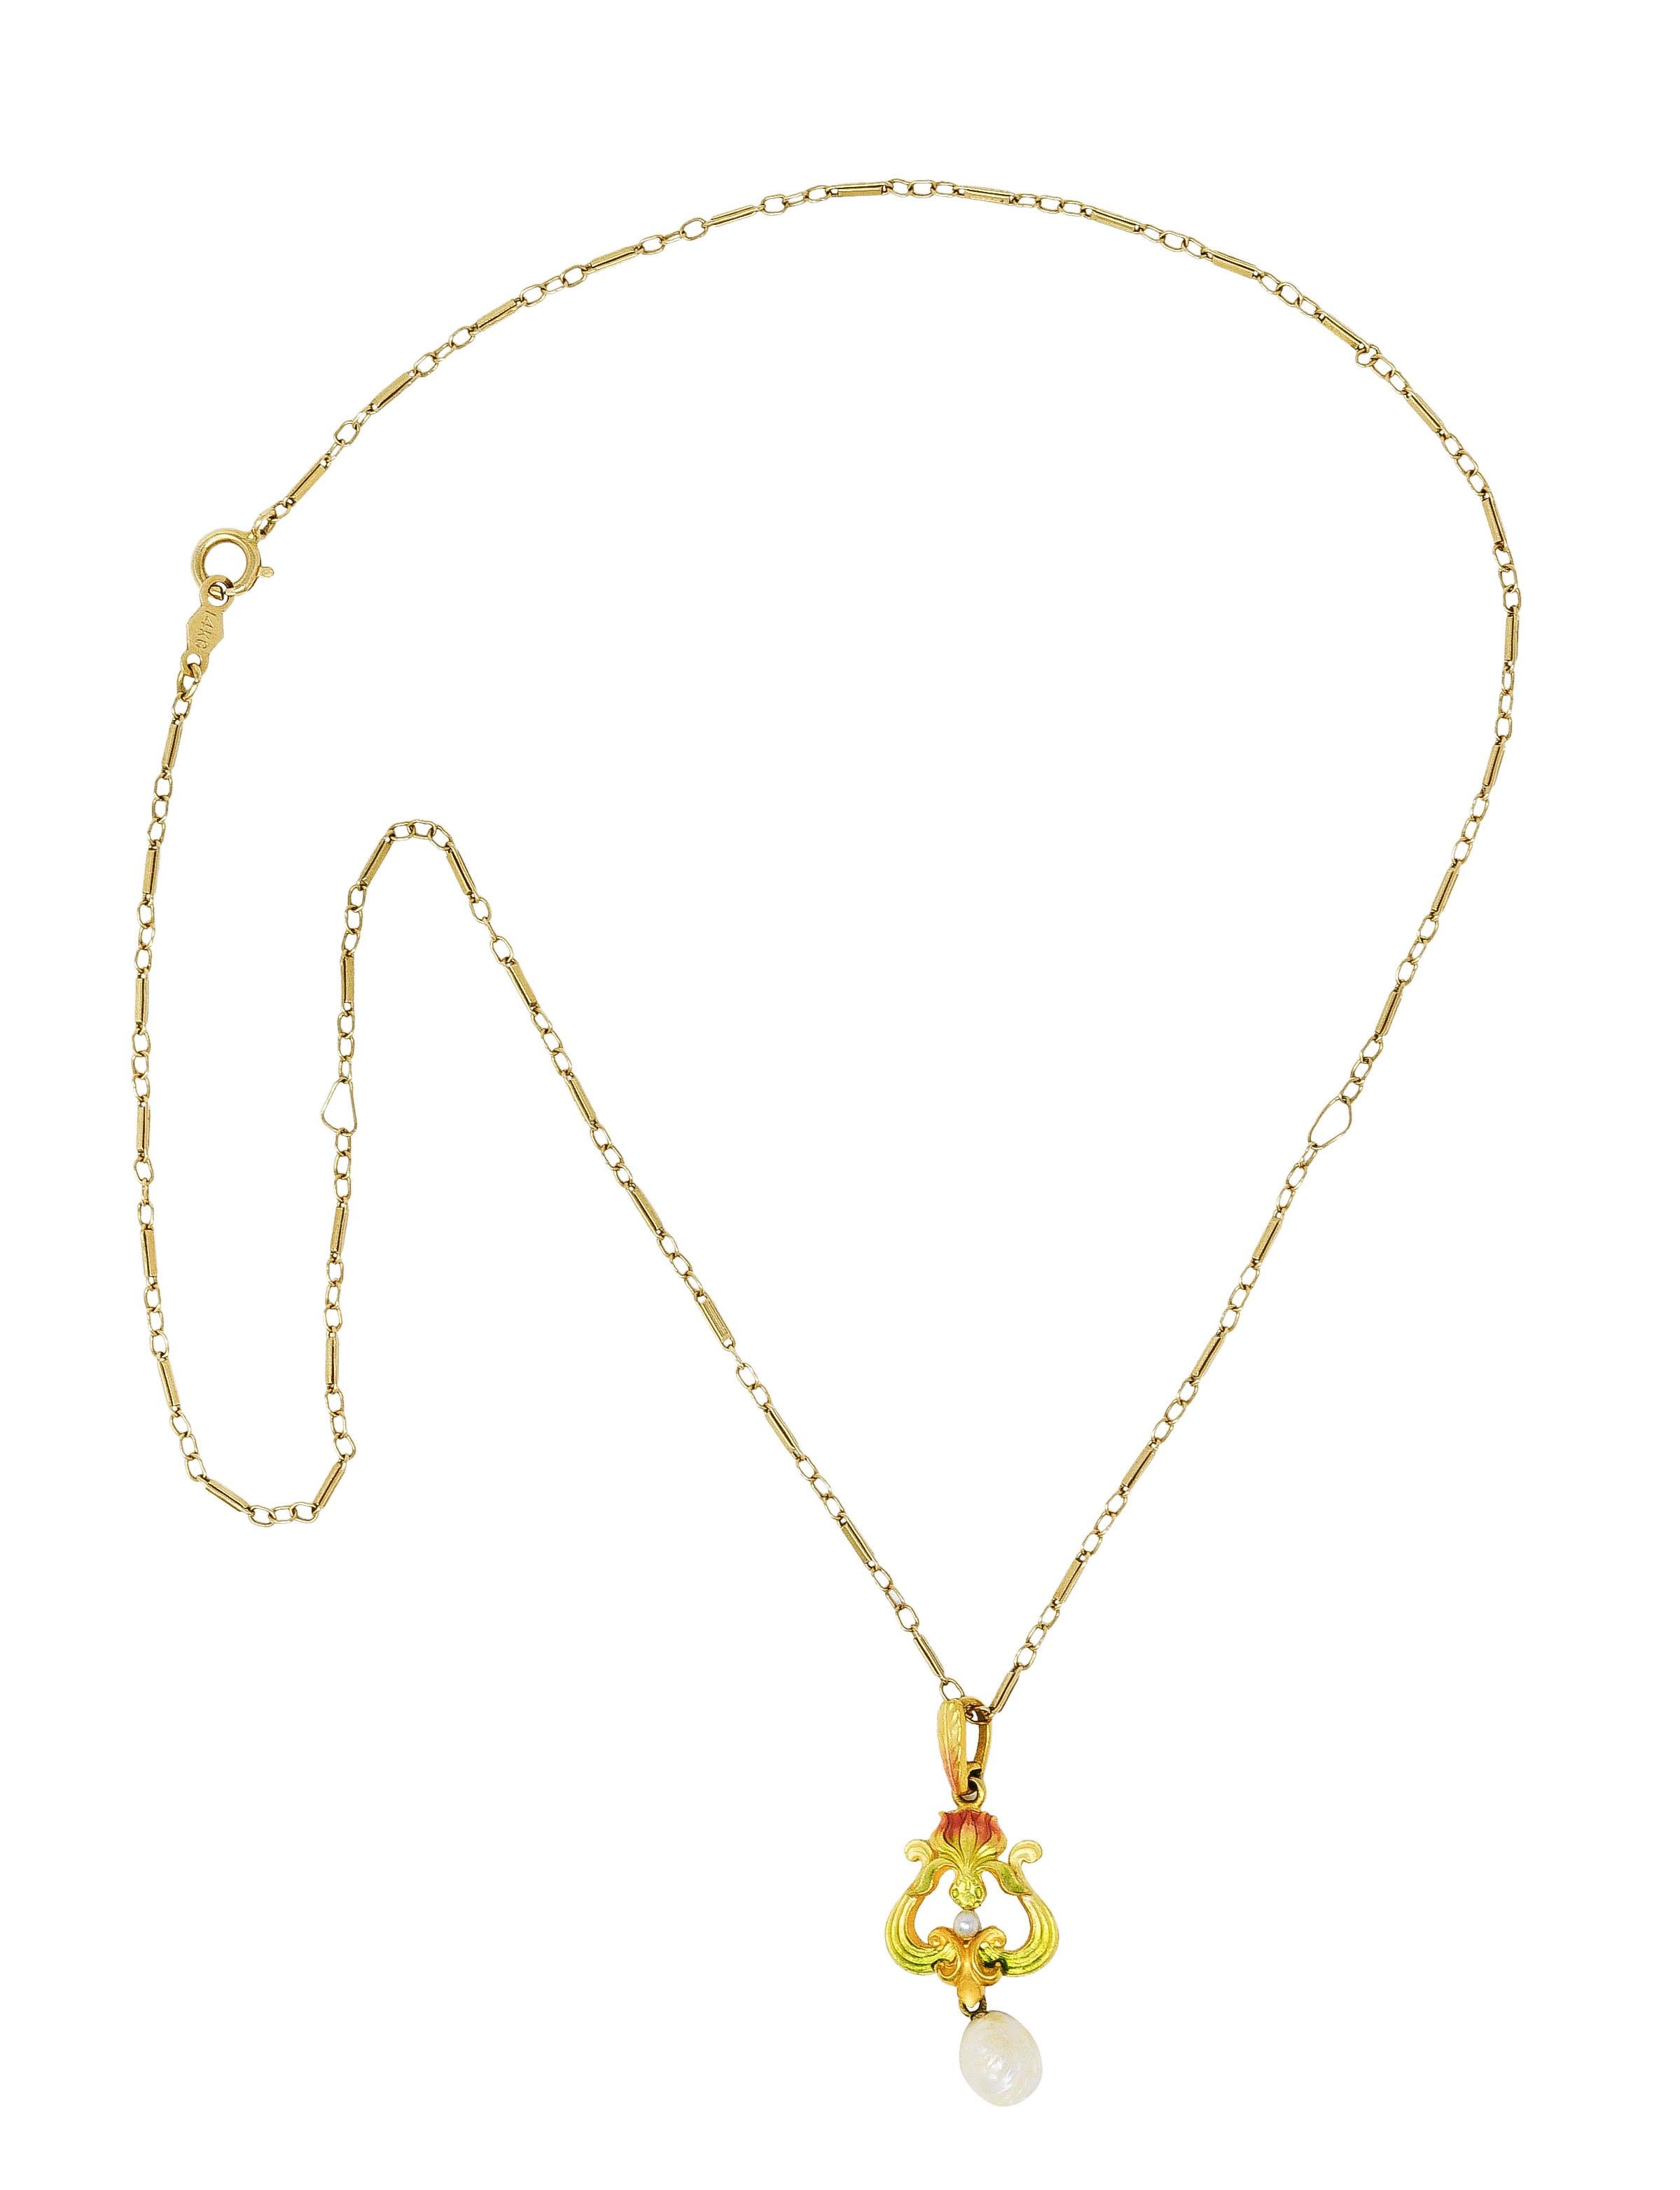 Necklace designed as 1.5 mm cable chain alternating with stylized bar links suspending foliate pendant

Pendant features engraved bale suspending grooved whiplash motifs with a stylized lotus flower

With transparent ombrè enamel ranging in color